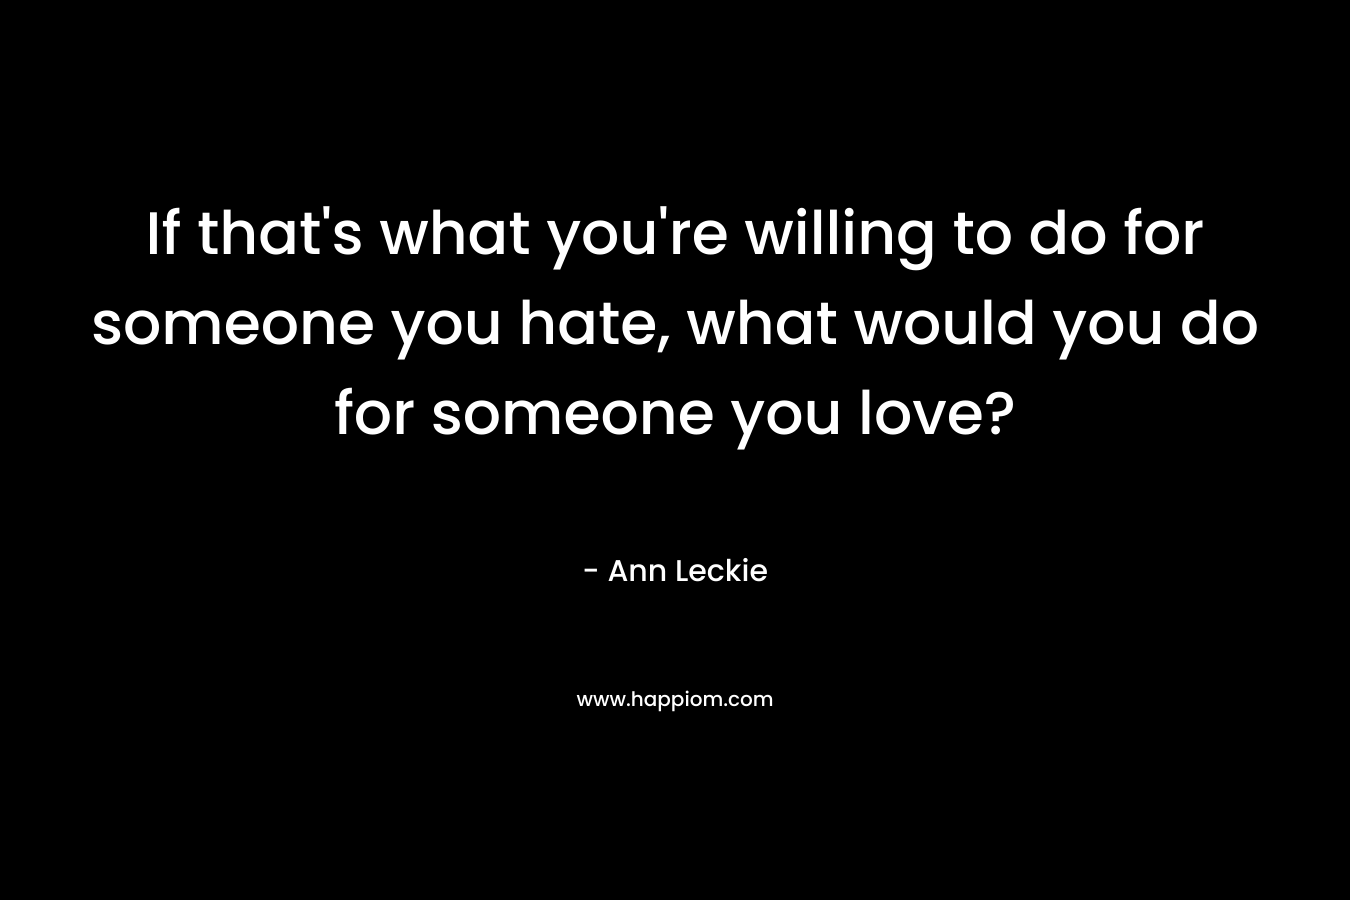 If that's what you're willing to do for someone you hate, what would you do for someone you love?